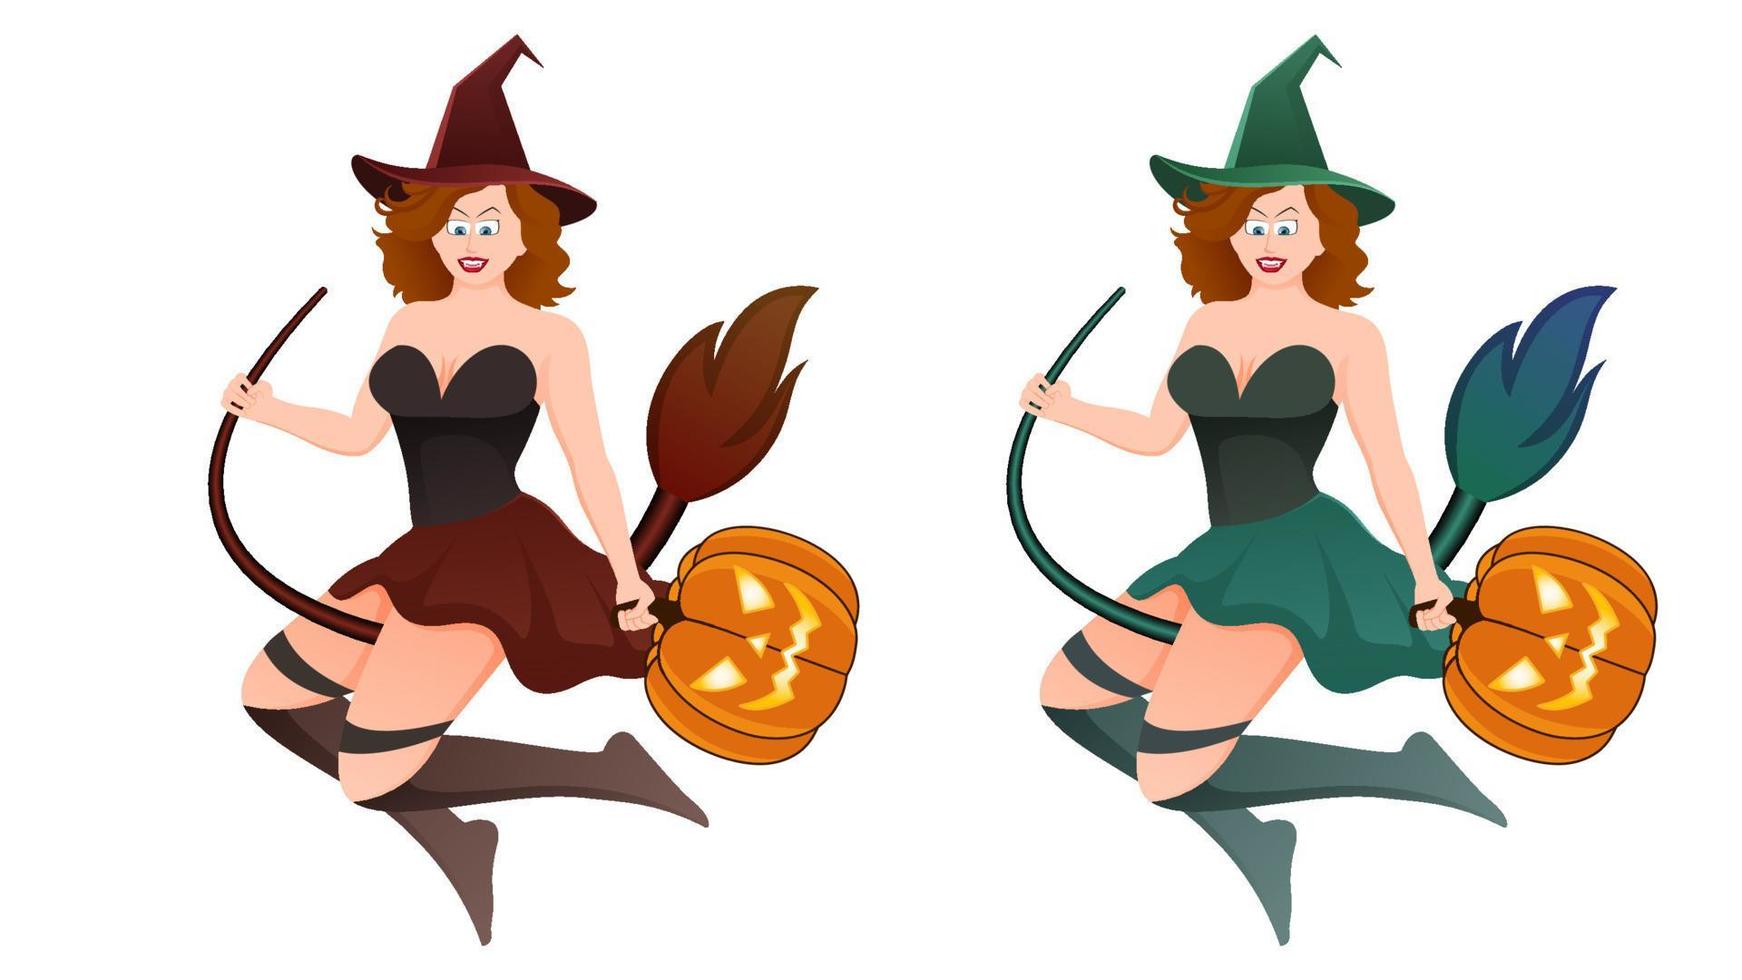 happy halloween, witch character vector illustration on white background.